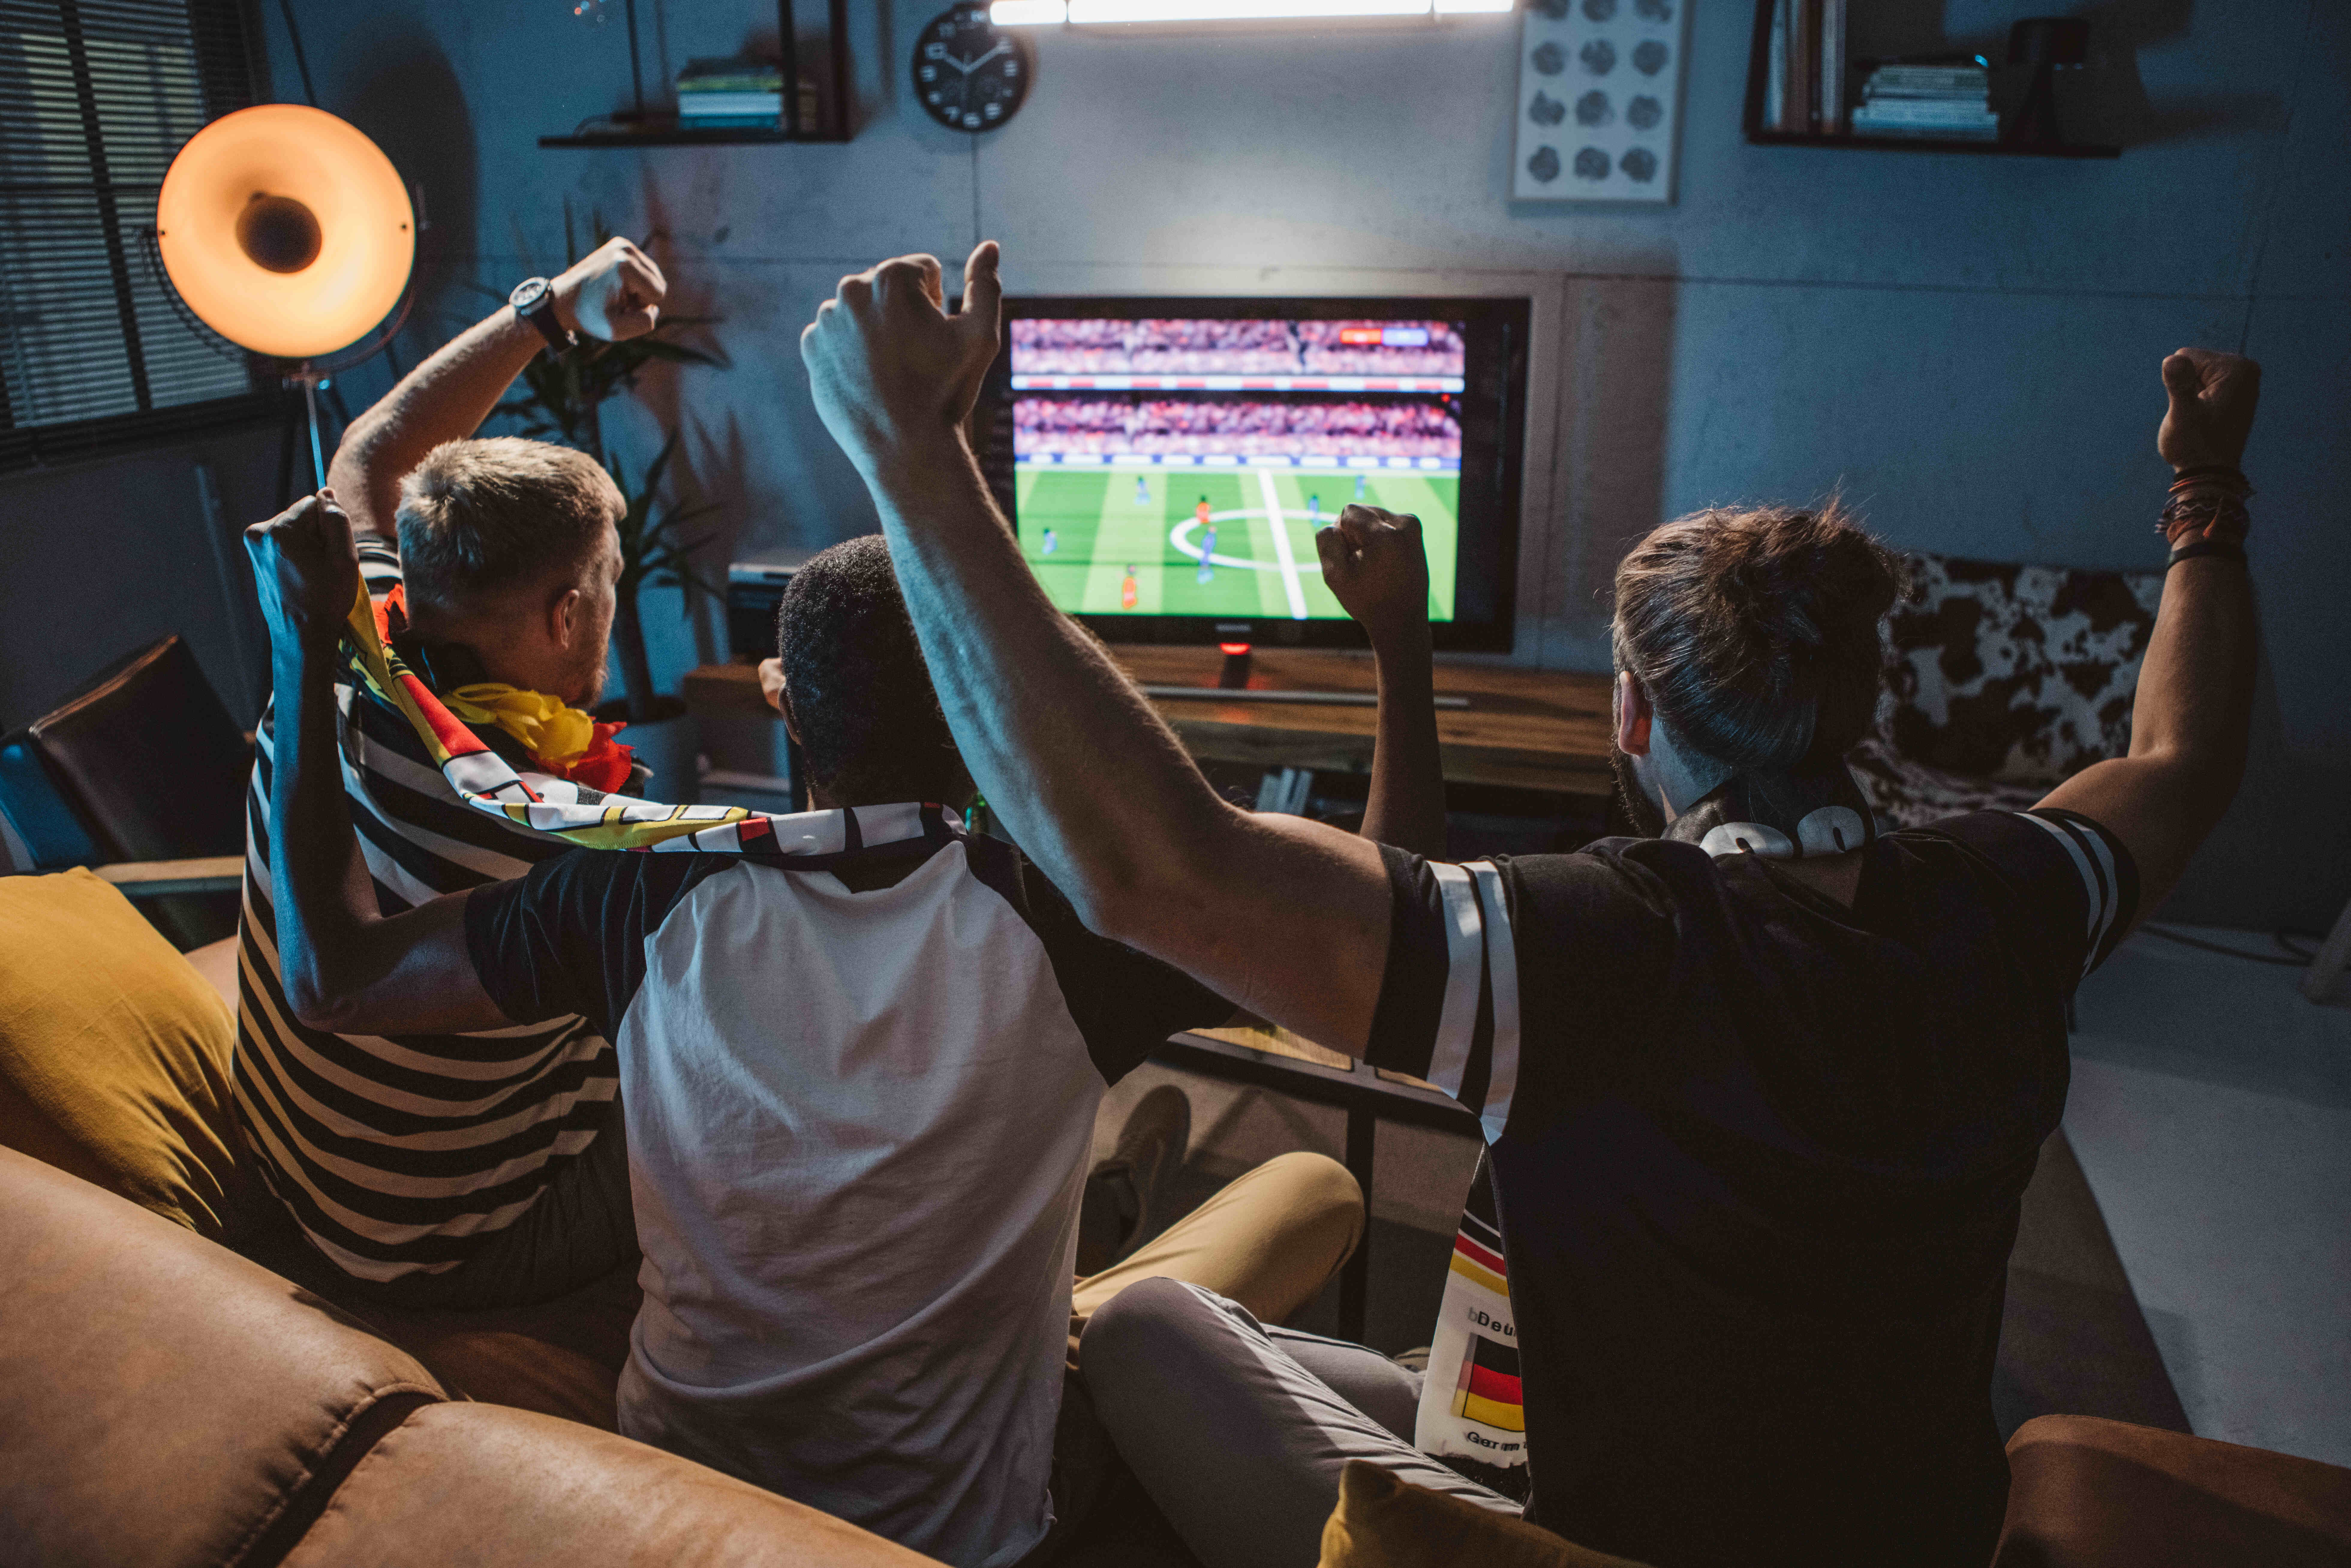 Why watching sports may be good for your wellbeing